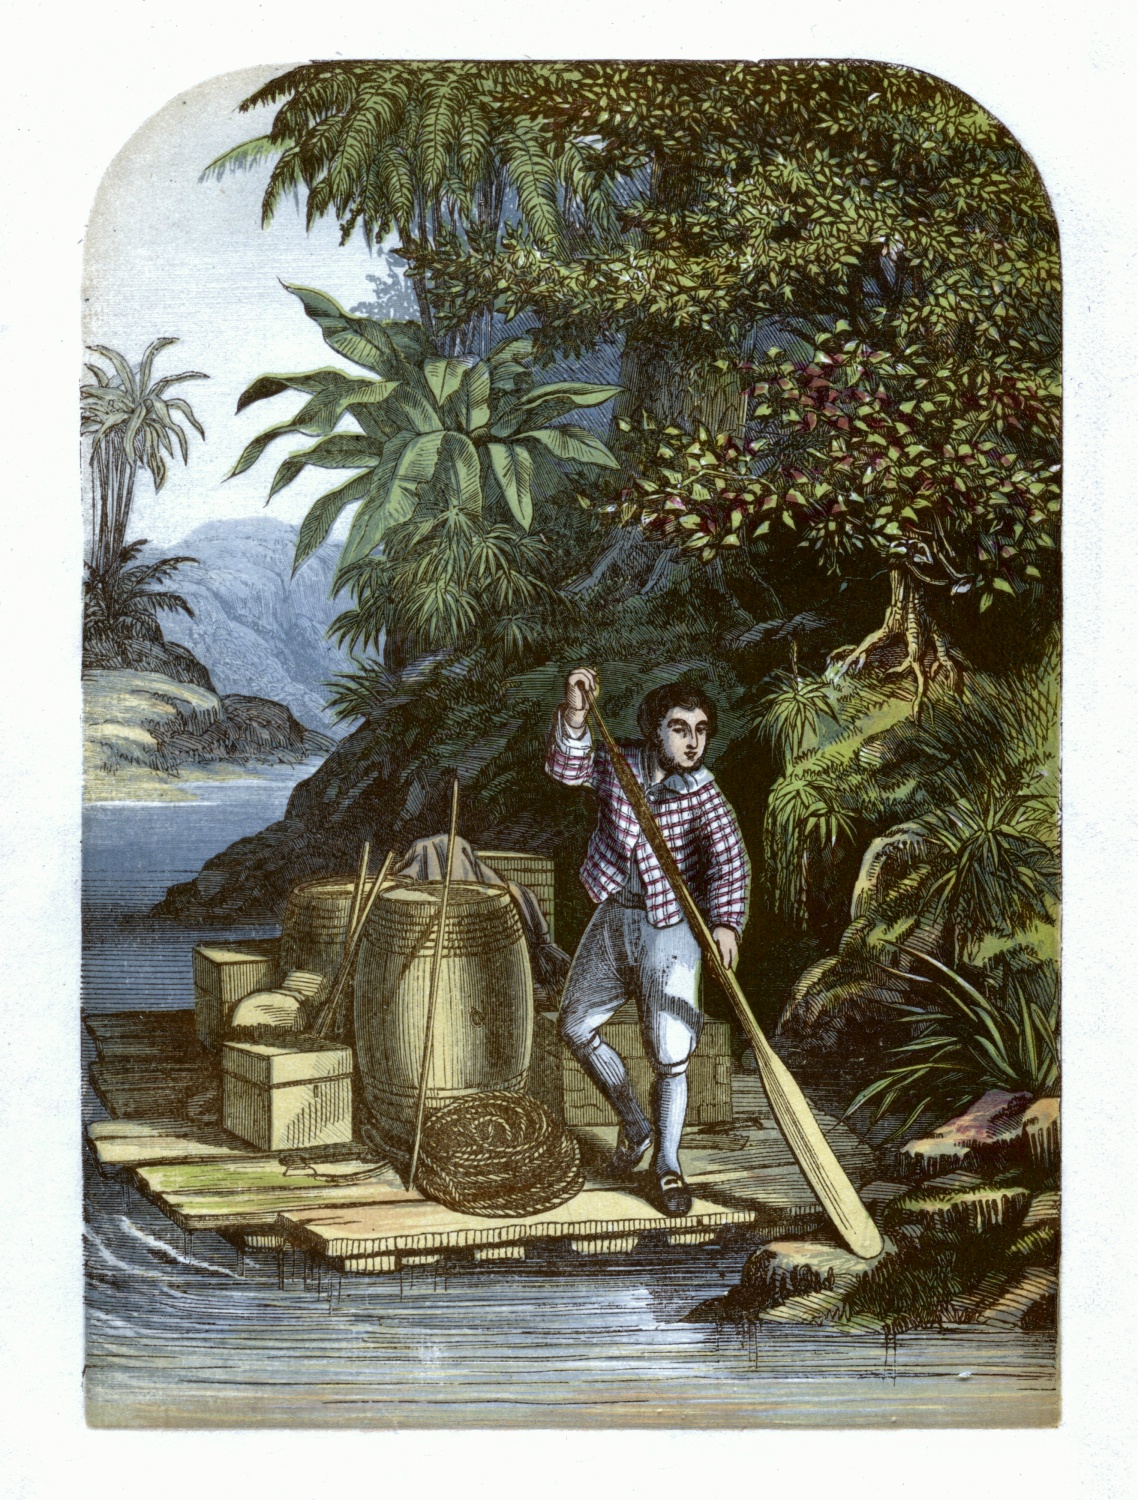 Robinson Crusoe by means of a raft saves many useful articles from the ship